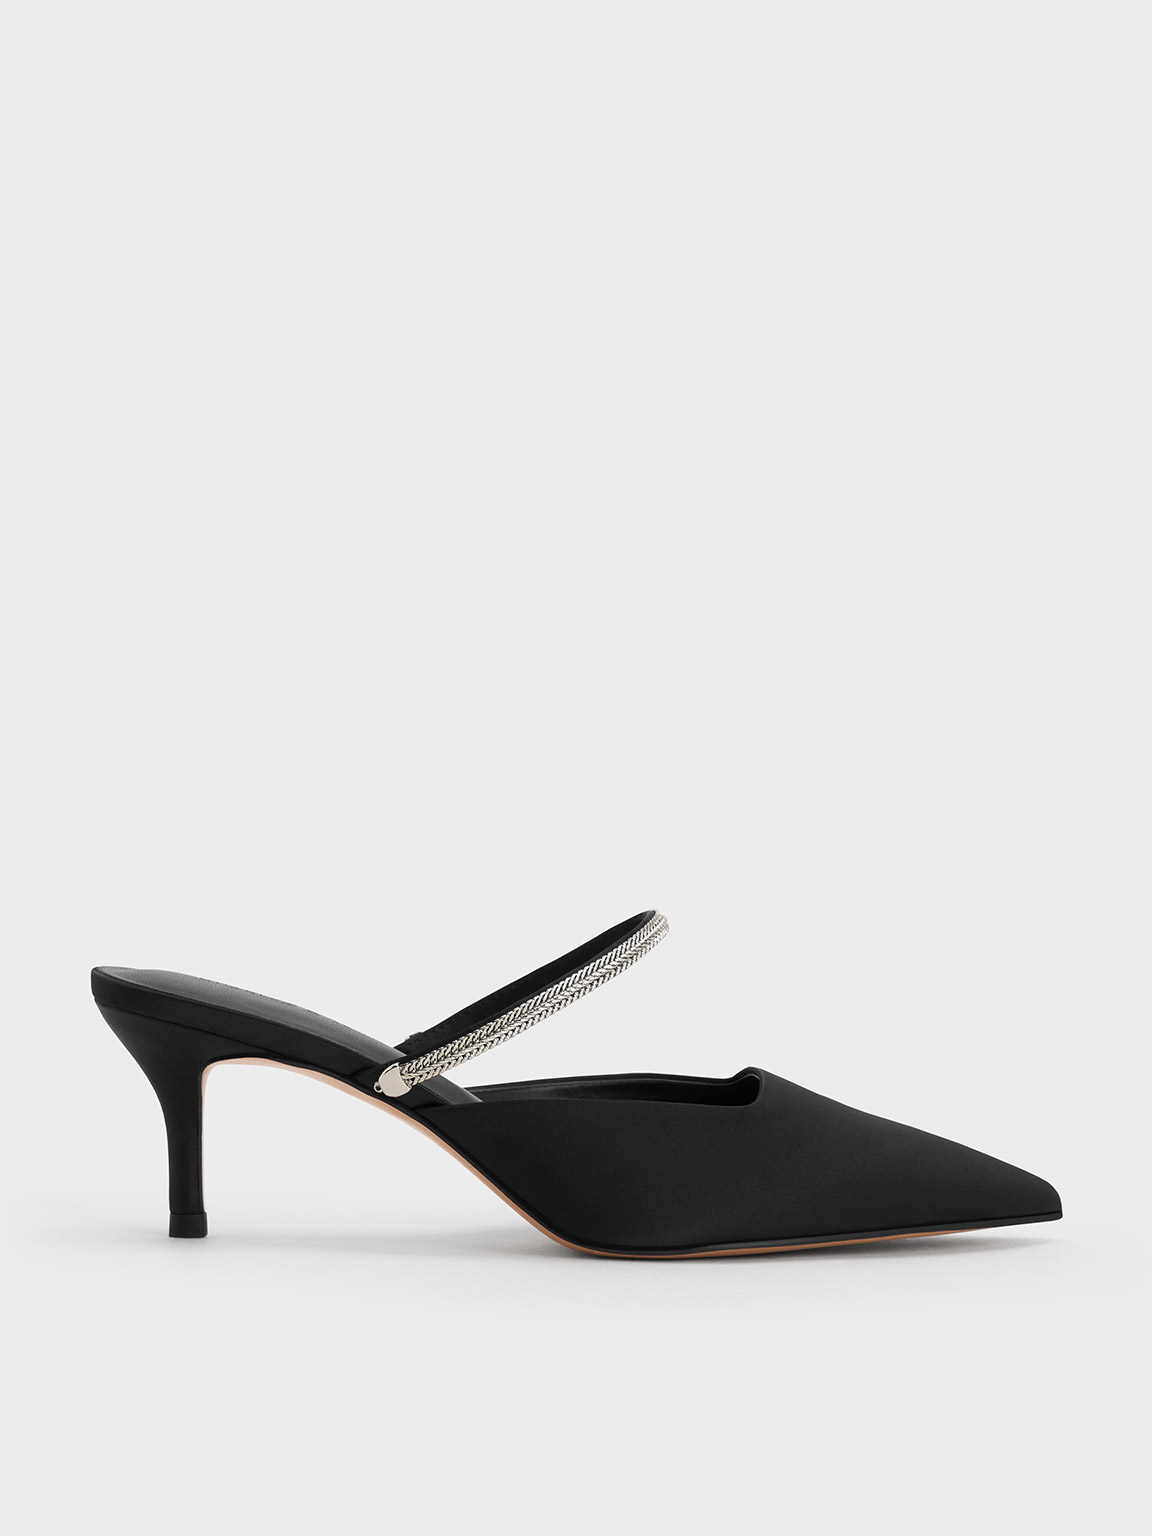 Black Textured Satin Braided-Strap Pointed-Toe Mules - CHARLES & KEITH SG